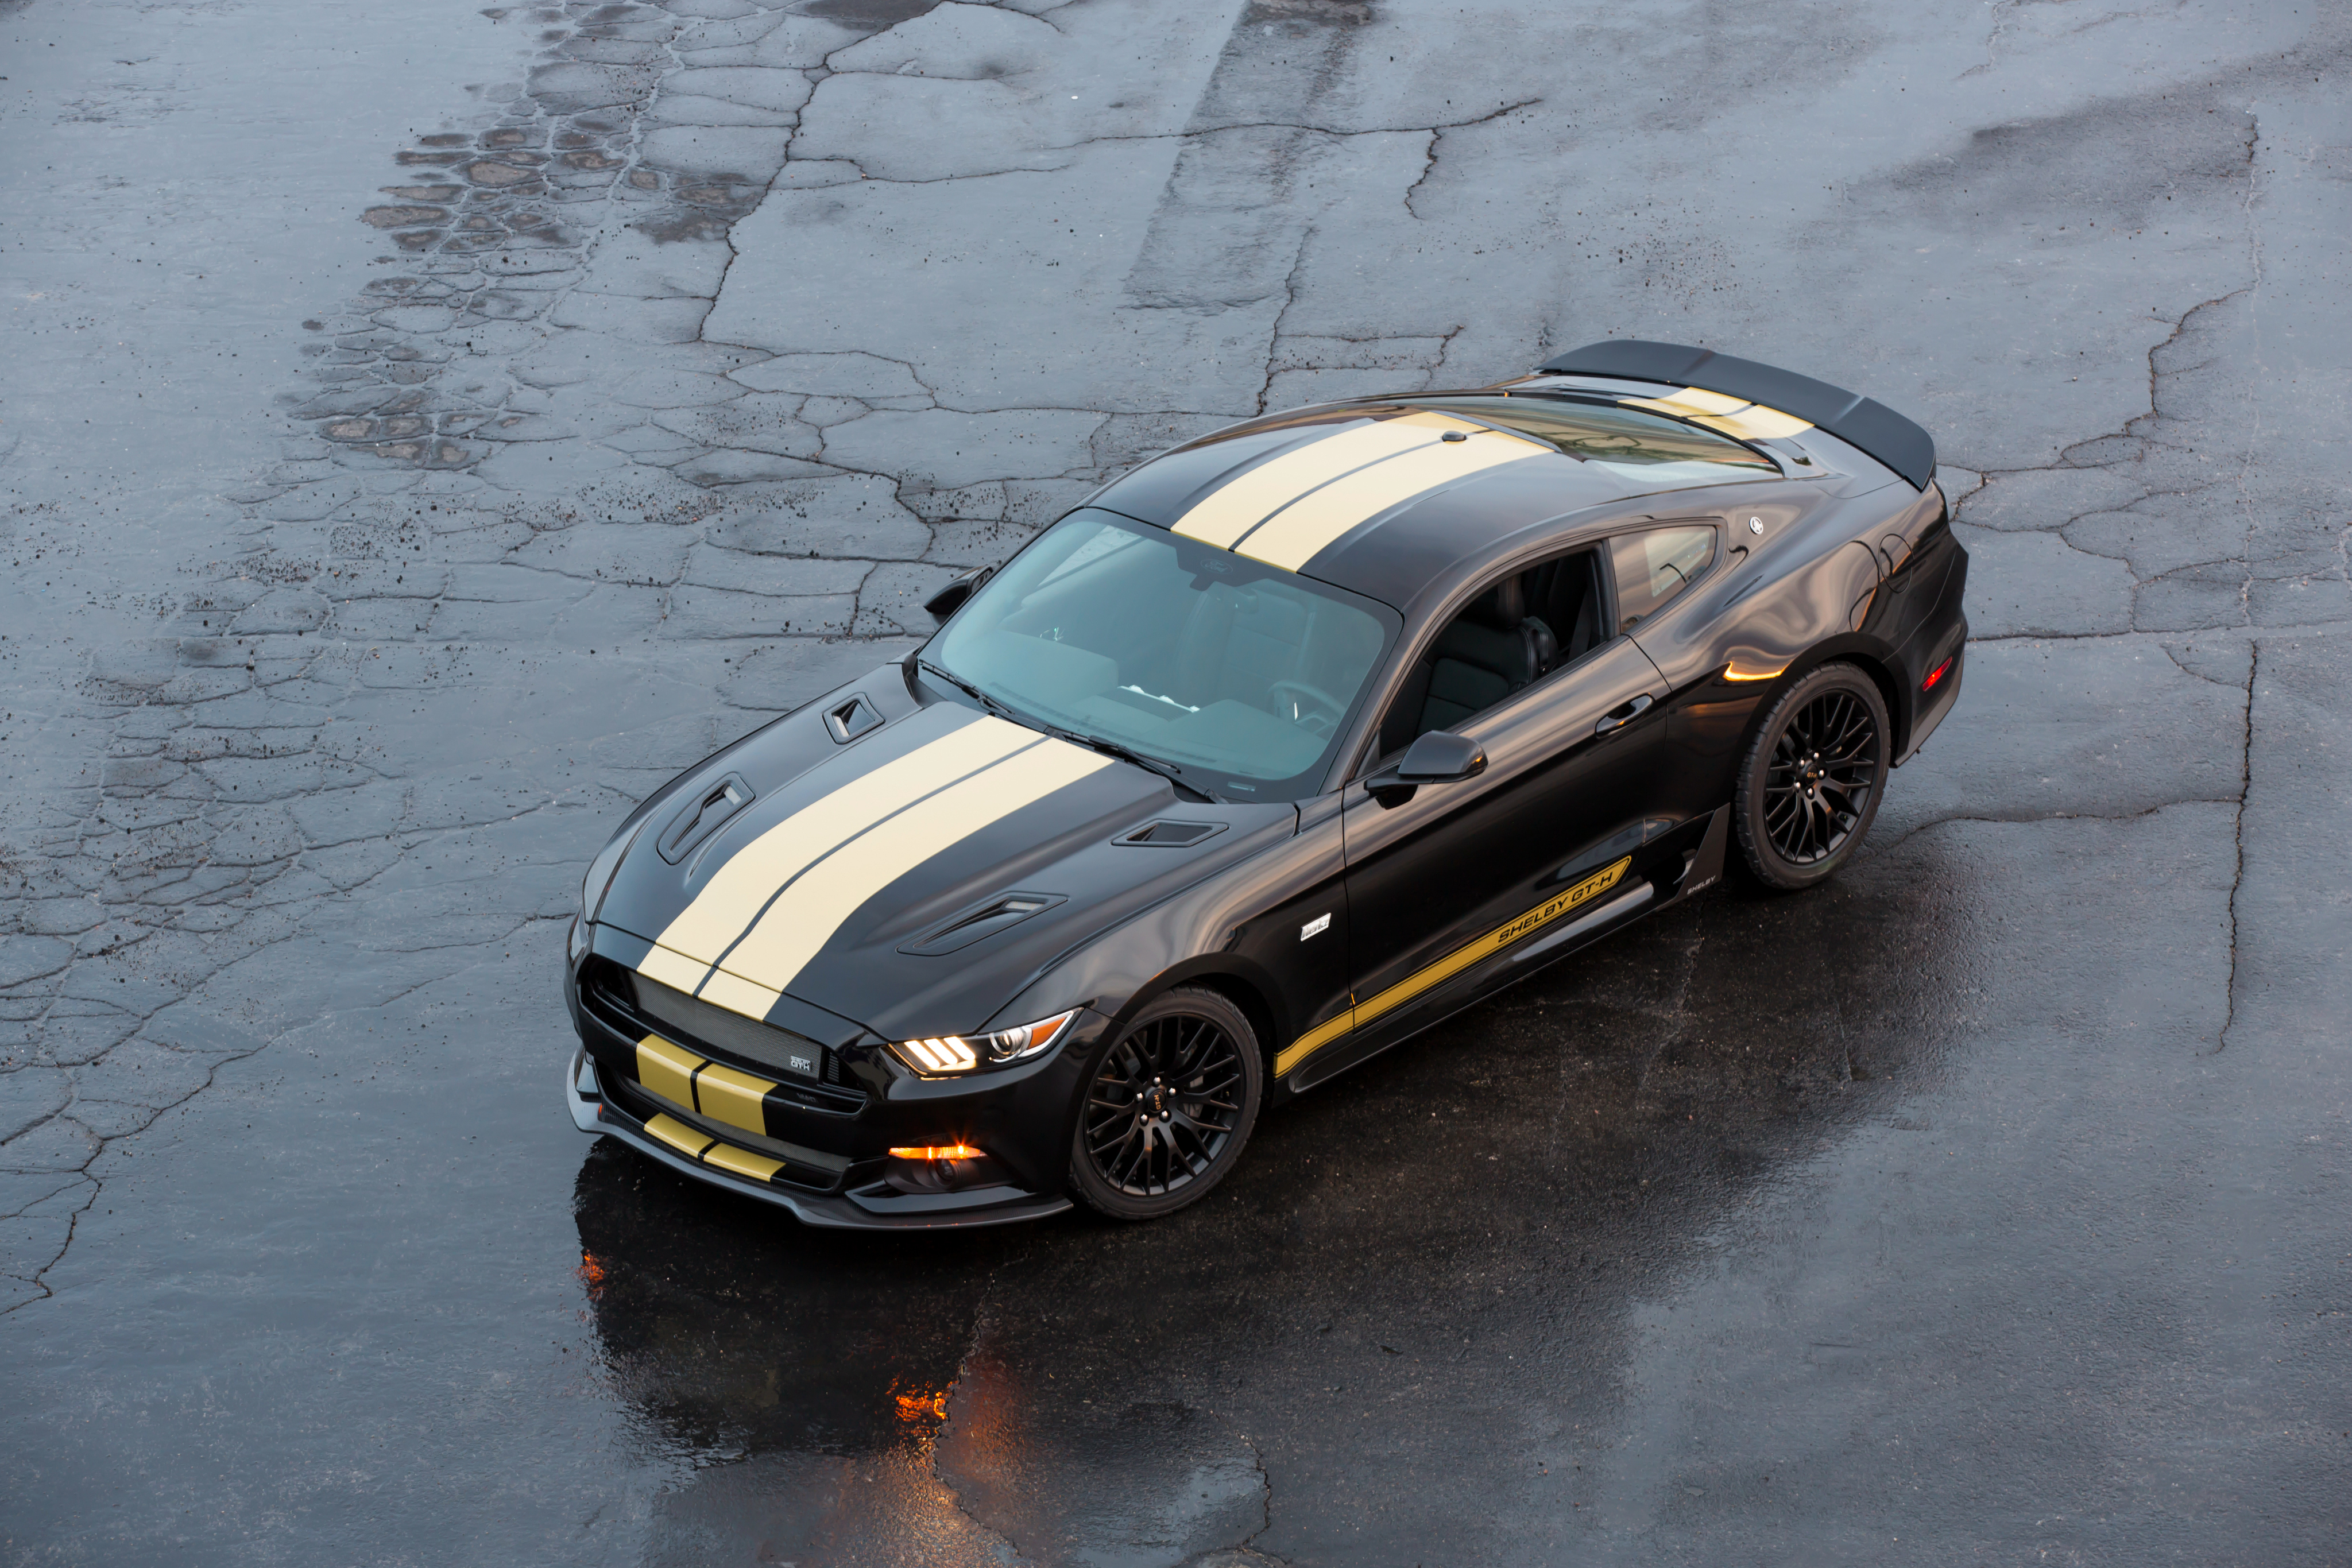 Black Car Car Ford Ford Mustang Ford Mustang Shelby Gt Muscle Car Vehicle 4096x2731